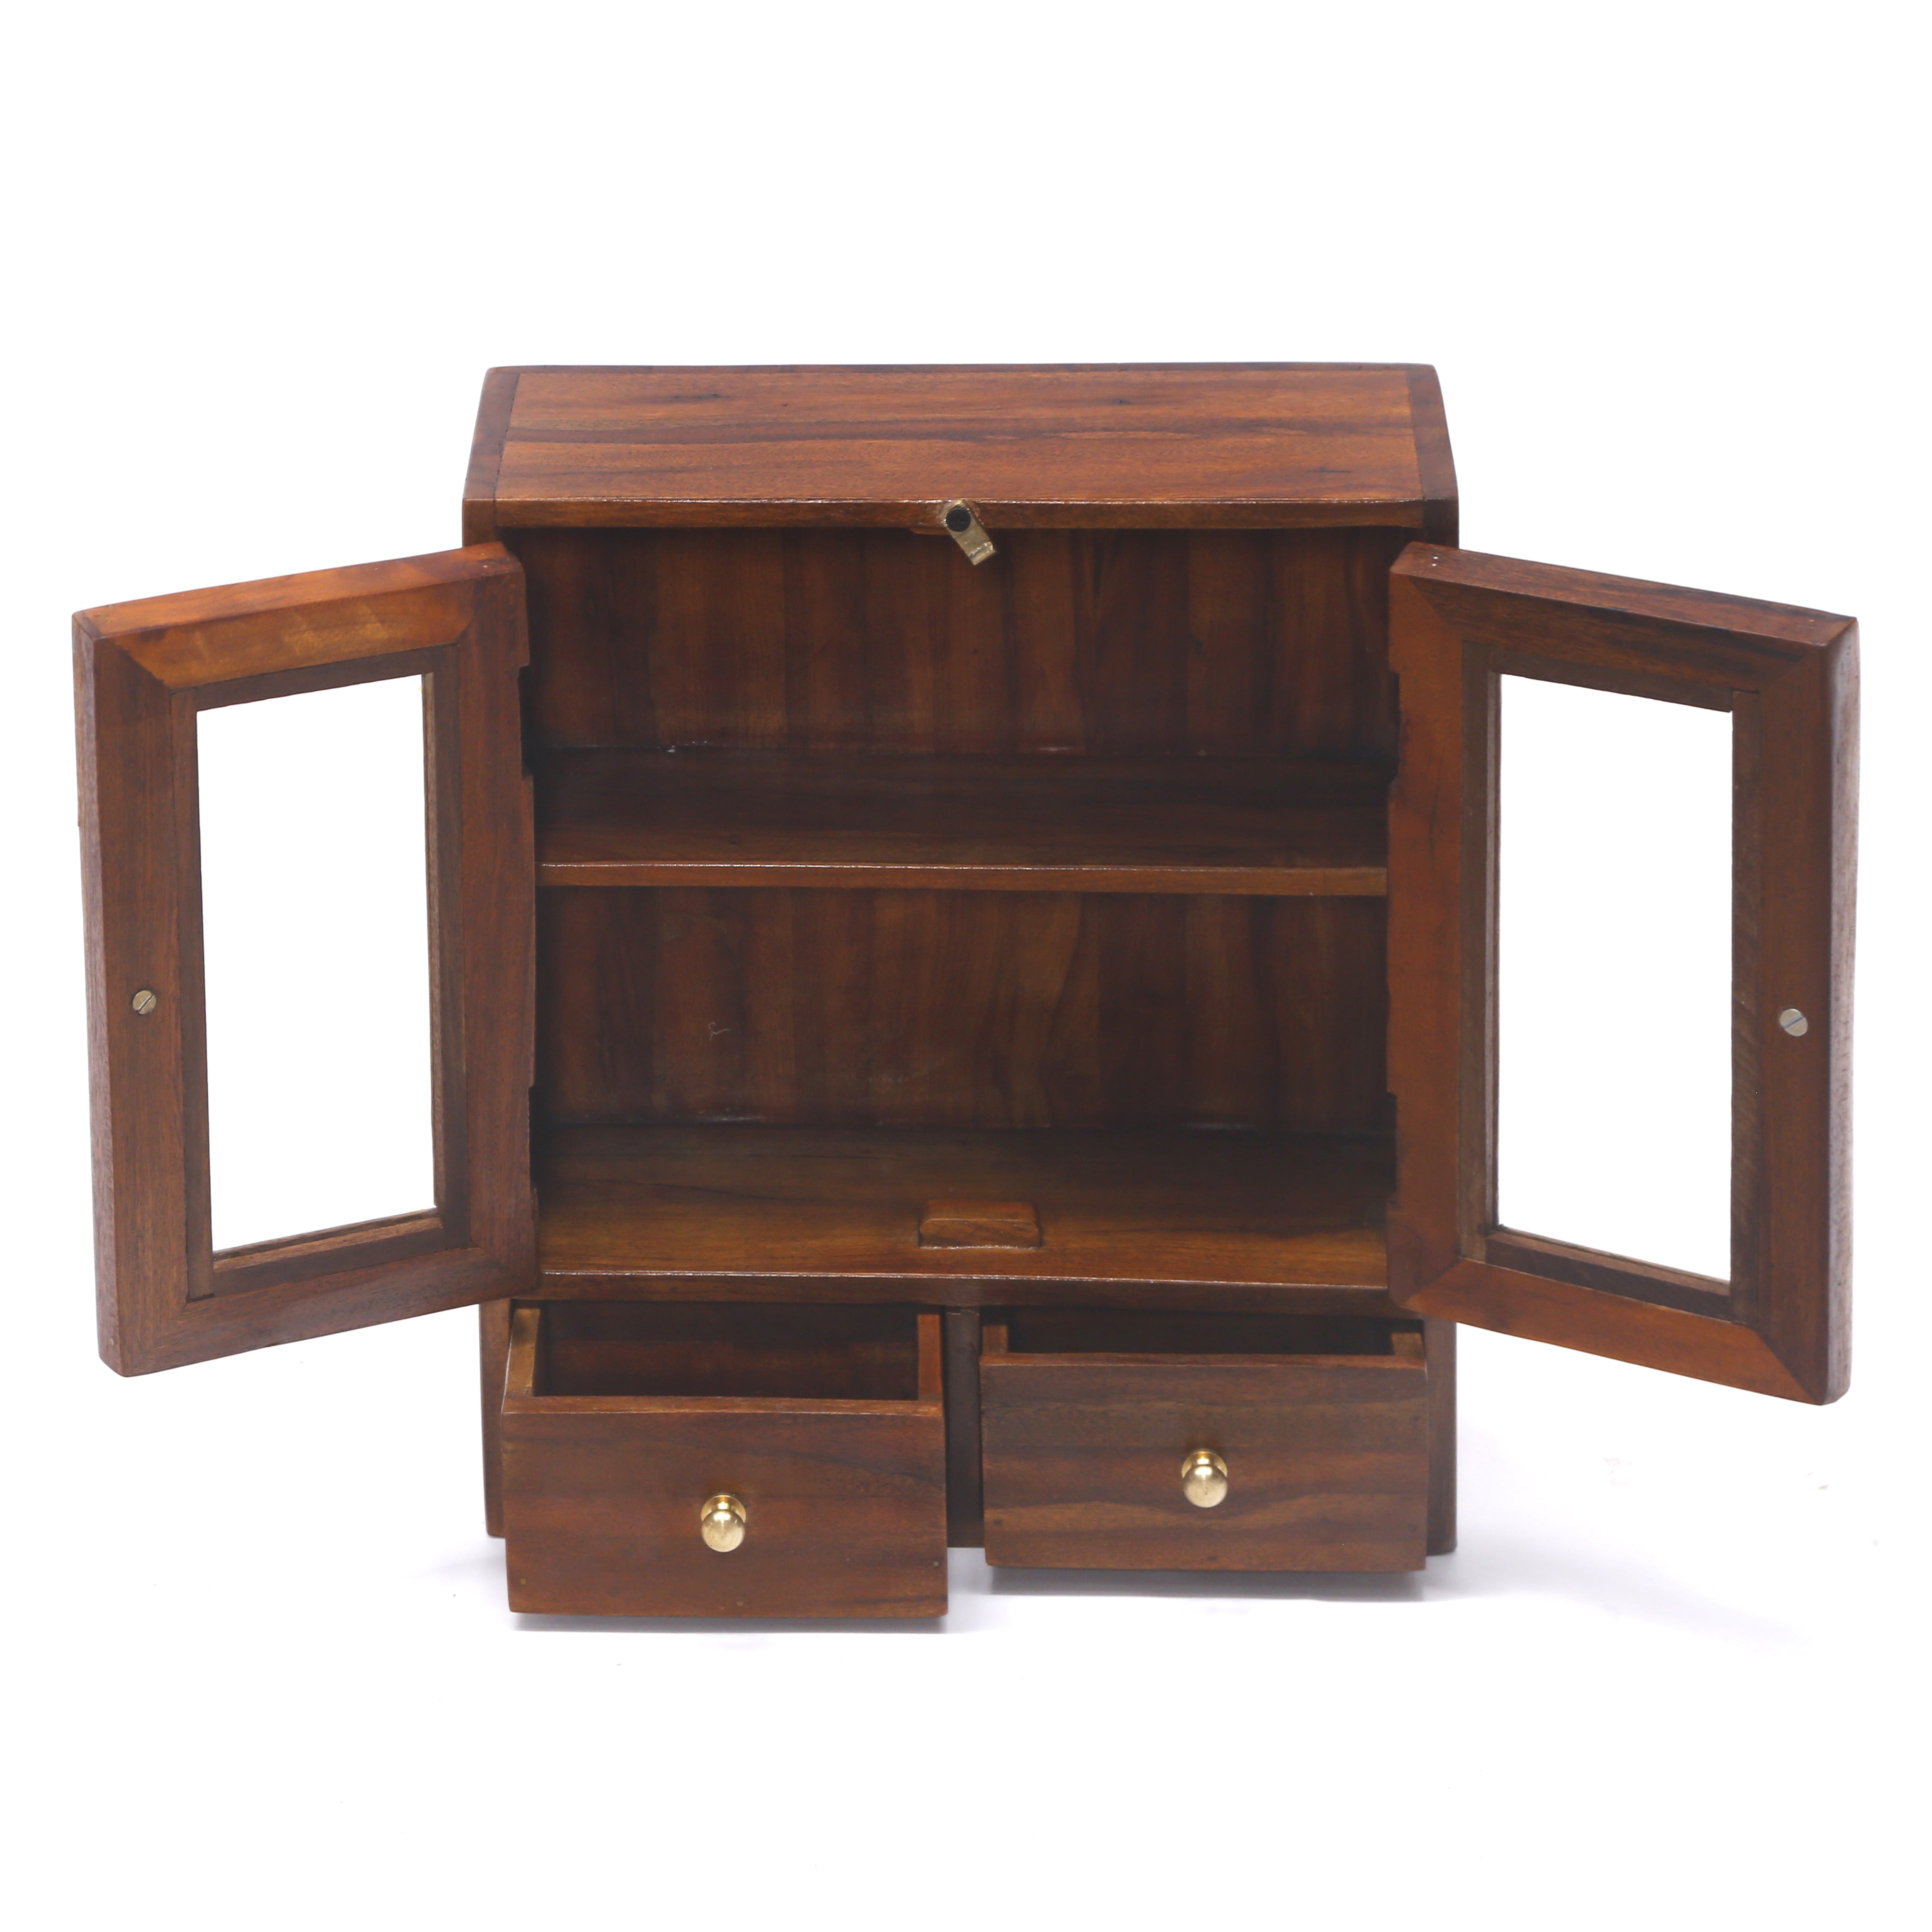 Two Drawer Compact Cabinet Wall Cabinet